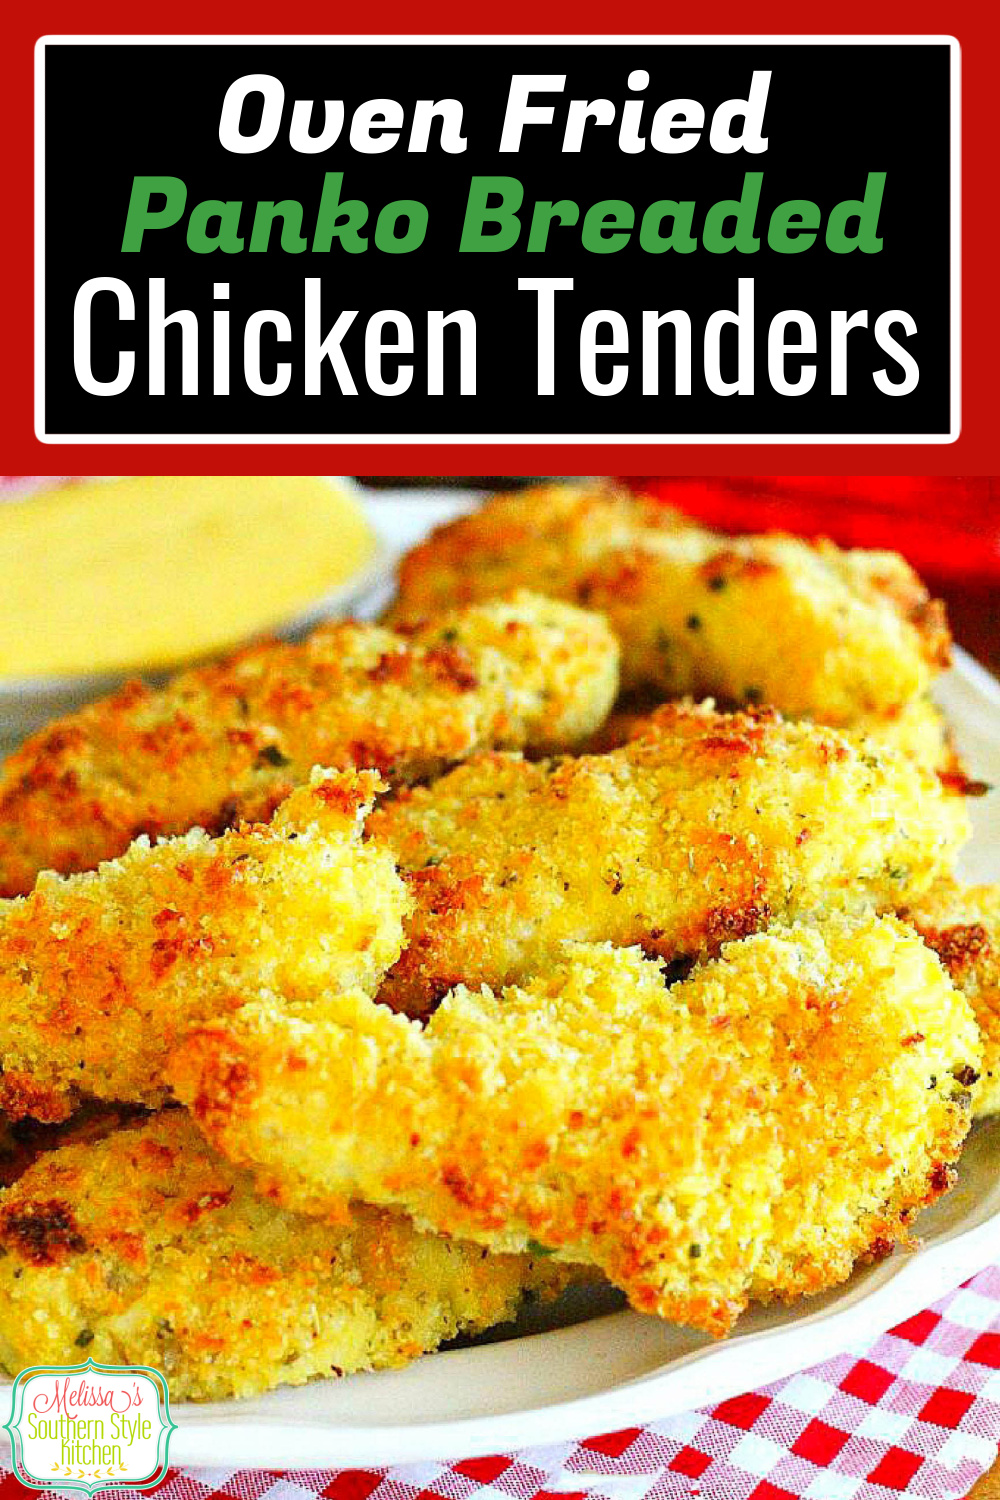 Kids of all ages love these Panko Parmesan cheese coated Oven Fried Chicken Tenders. Bonus Air Fryer instructions included! #chicken #easychickenrecipes #chickentenders #ovenfriedchicken via @melissasssk